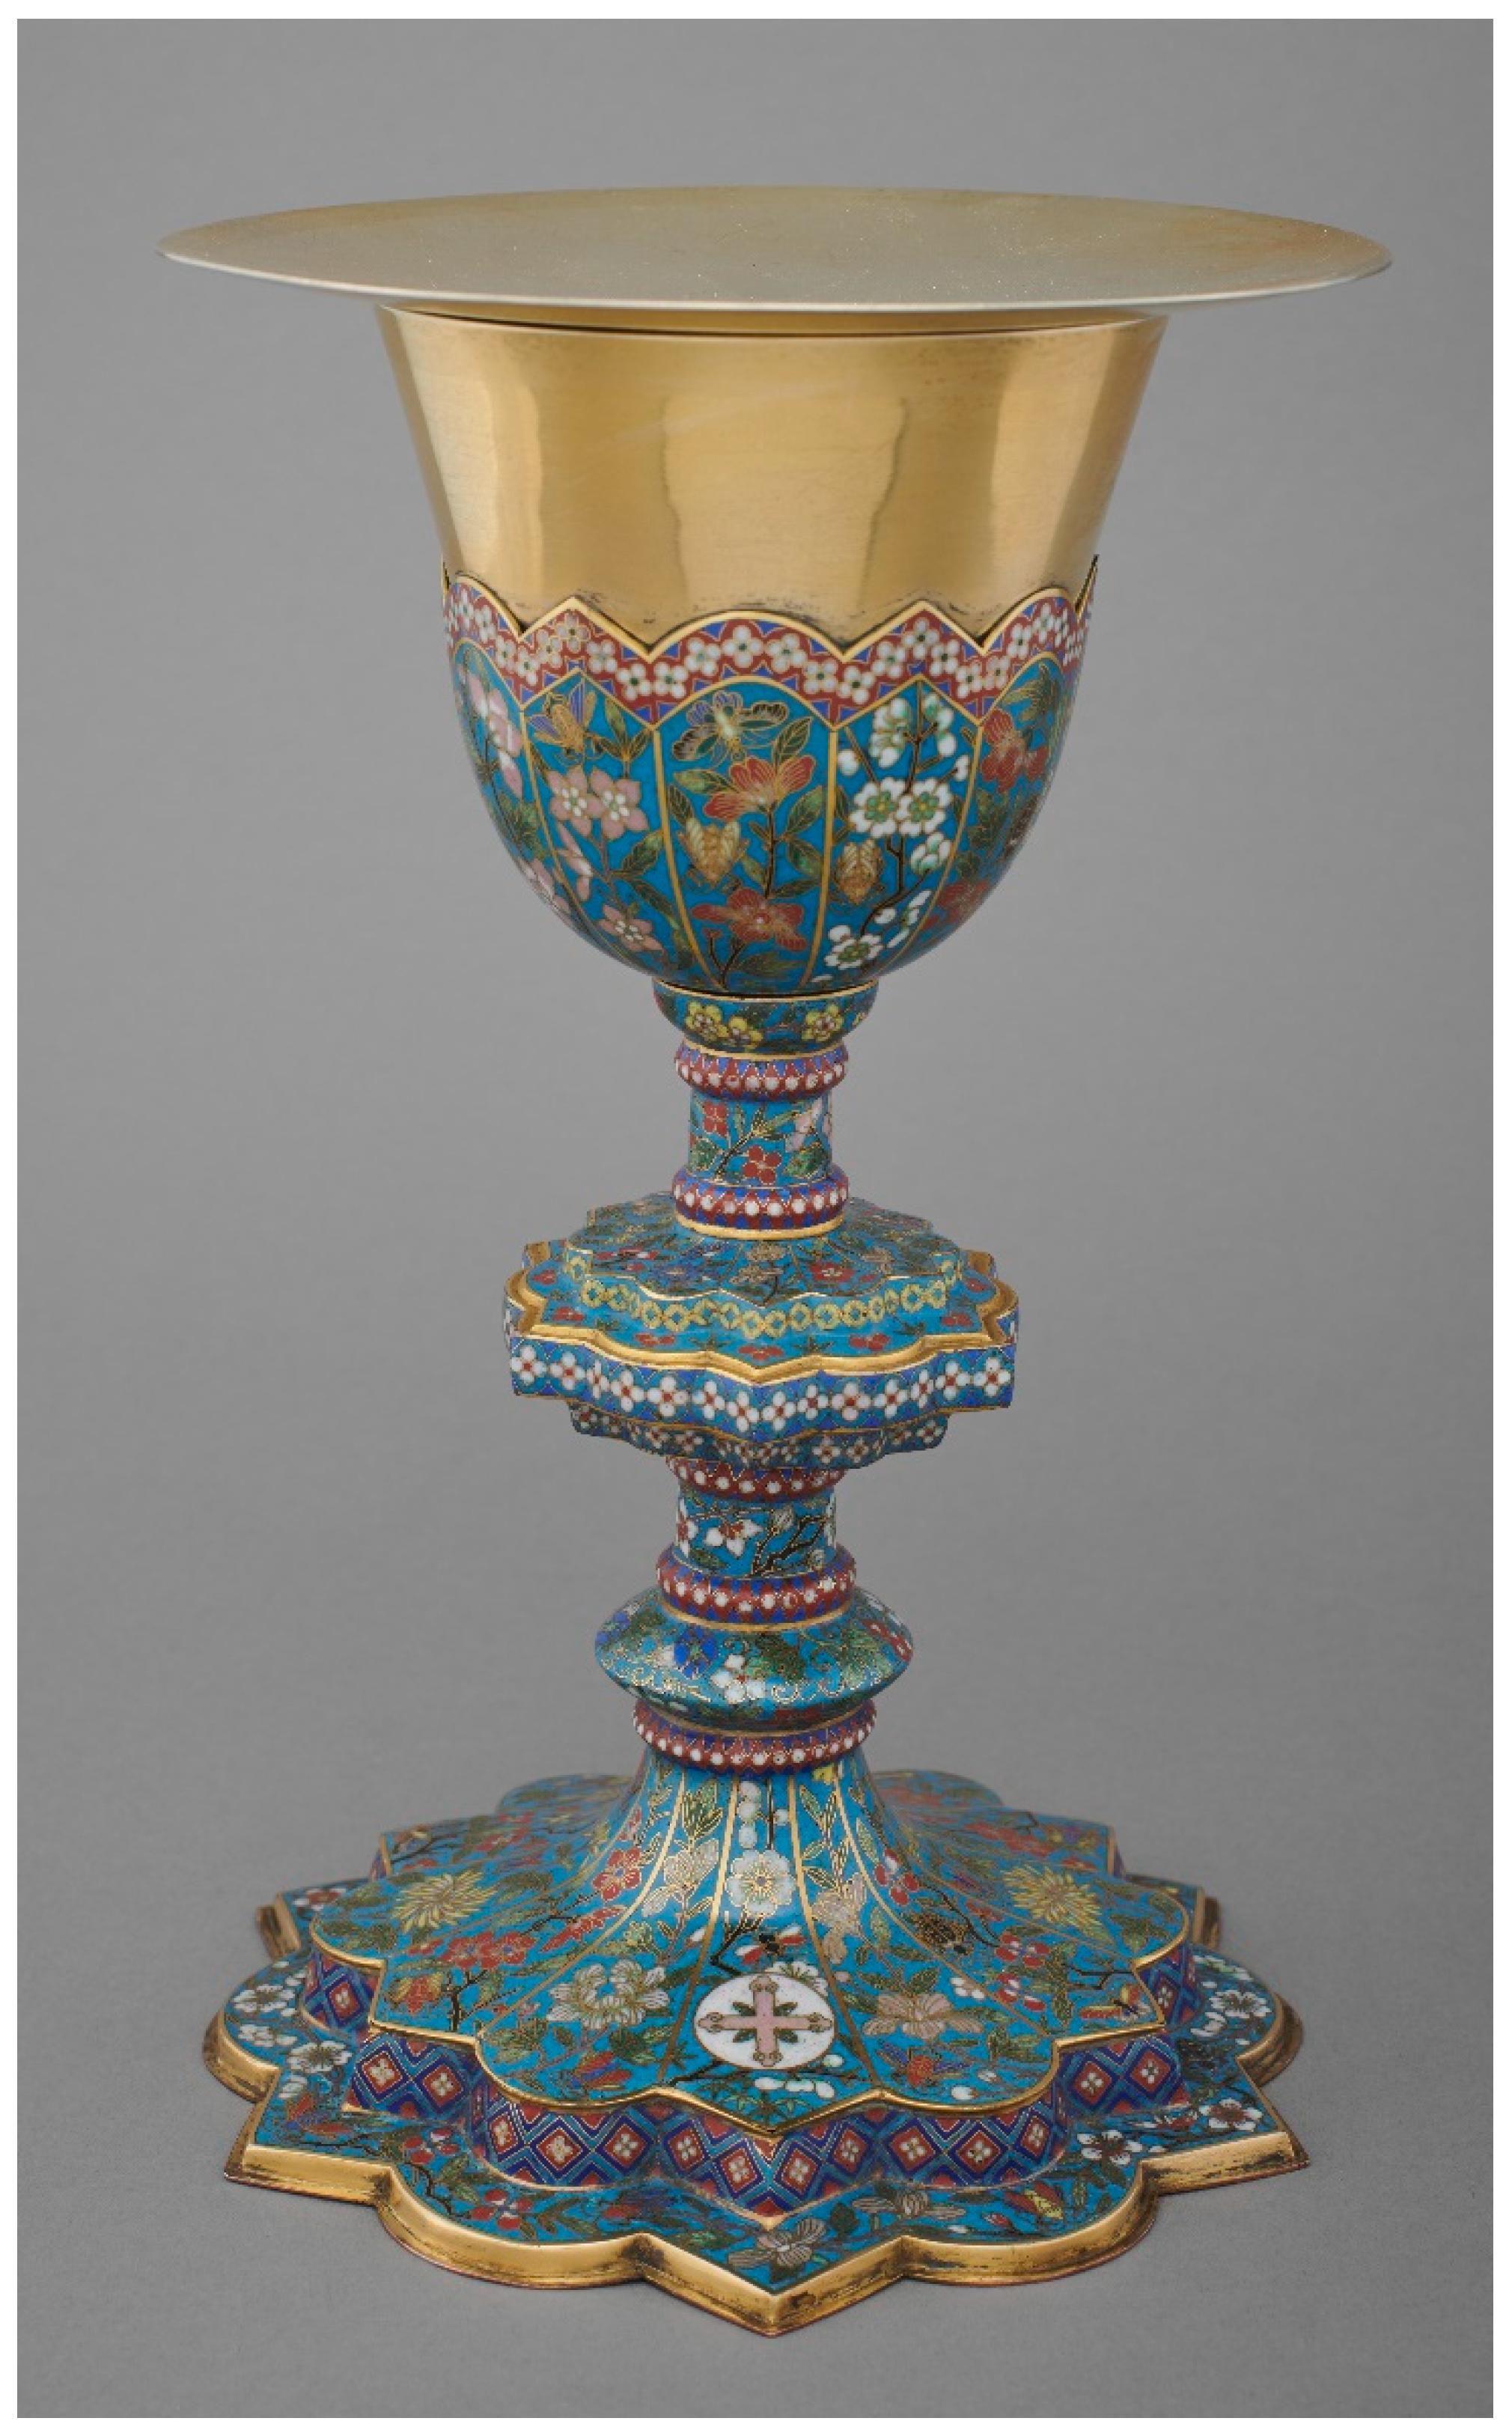 Religions | Free Christian Decheng, Chinese Art Workshops: A Cloisonné Beitang and Contribution on Tushanwan Full-Text | New